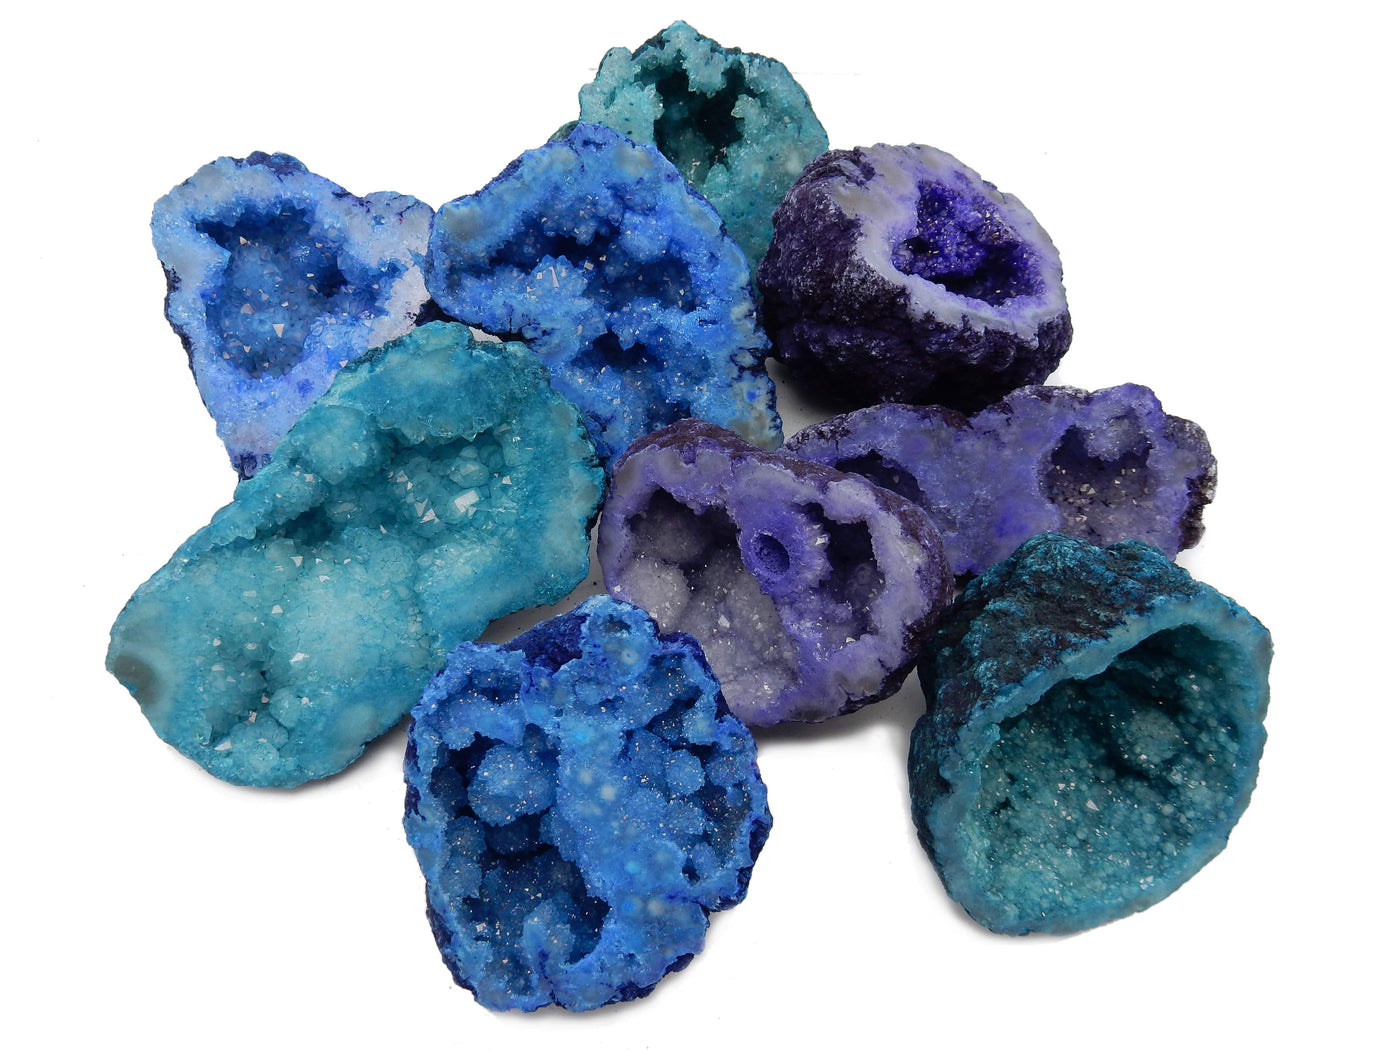 assorted Large Geode Halves on a table showing ranges in size and shape